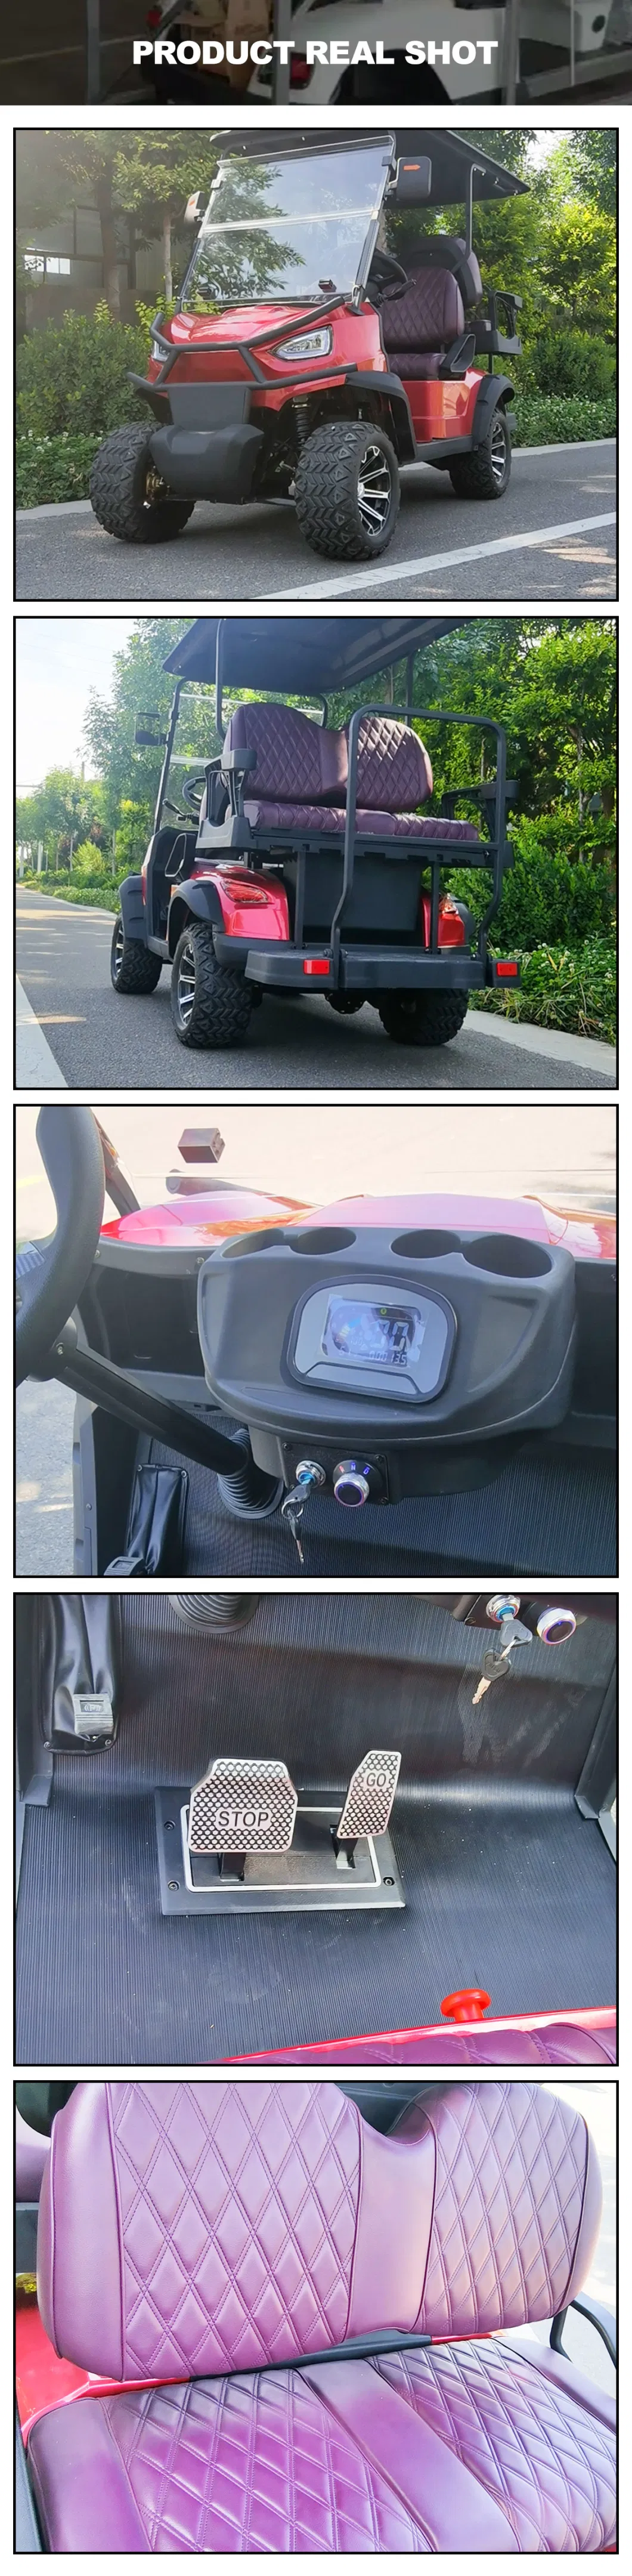 4 Passenger Mobility Scooters off Road Pink Black Buggy Vintage Golf Mini Car Utility Electric Vehicle